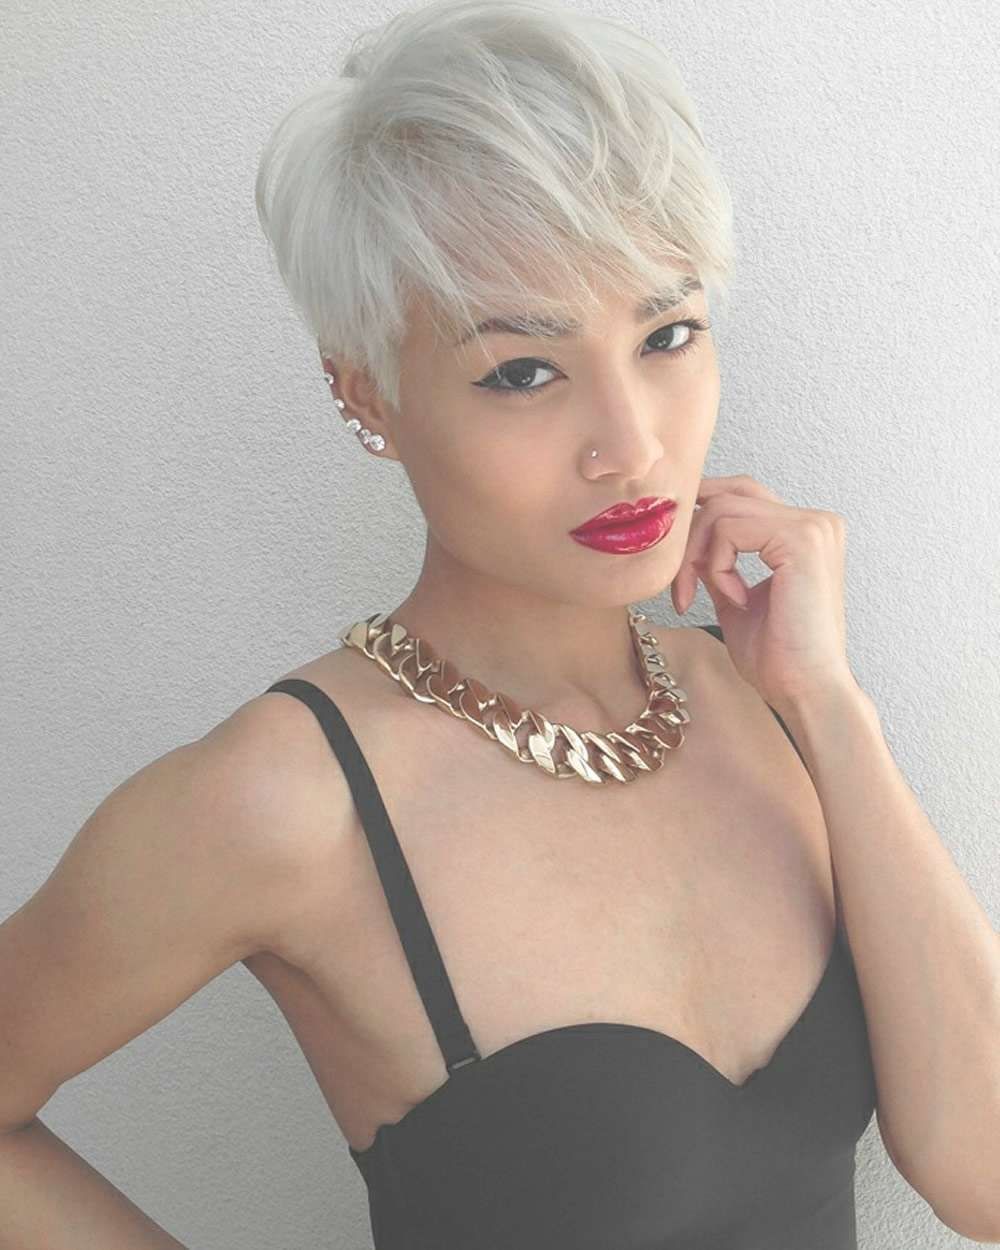 Pixie Haircuts For Asian Women | 18 Best Short Hairstyle Ideas In Most Popular Asian Pixie Hairstyles (View 7 of 15)